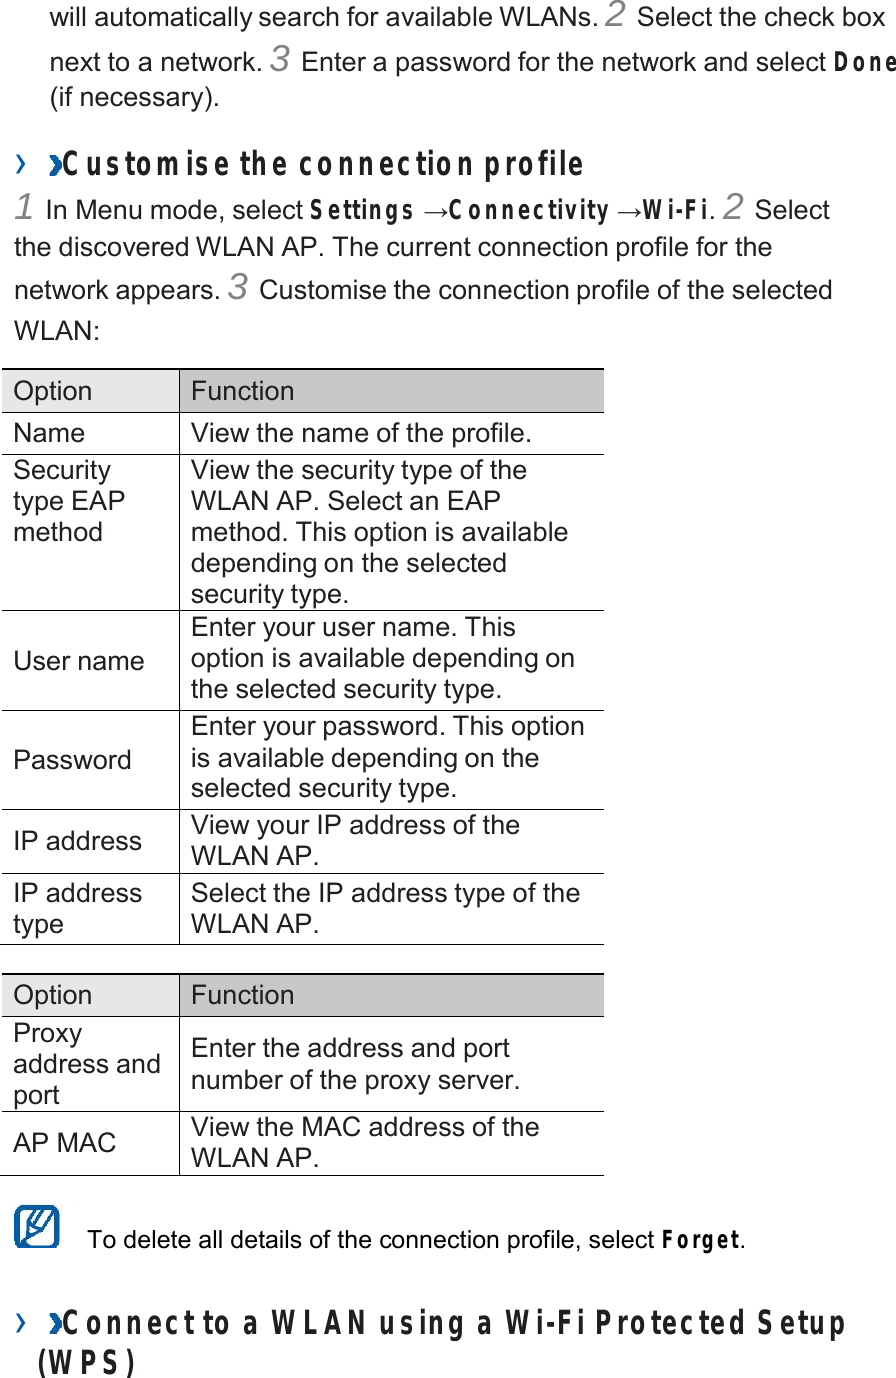  will automatically search for available WLANs. 2 Select the check box next to a network. 3 Enter a password for the network and select Done (if necessary).  ›  Customise the connection profile 1 In Menu mode, select Settings →Connectivity →Wi-Fi. 2 Select the discovered WLAN AP. The current connection profile for the network appears. 3 Customise the connection profile of the selected WLAN:  Option Function Name View the name of the profile. Security type EAP method View the security type of the WLAN AP. Select an EAP method. This option is available depending on the selected security type.   User name Enter your user name. This option is available depending on the selected security type.   Password Enter your password. This option is available depending on the selected security type.  IP address View your IP address of the WLAN AP. IP address type Select the IP address type of the WLAN AP.  Option Function Proxy address and port  Enter the address and port number of the proxy server.  AP MAC View the MAC address of the WLAN AP.   To delete all details of the connection profile, select Forget.   ›  Connect to a WLAN using a Wi-Fi Protected Setup (W PS) 